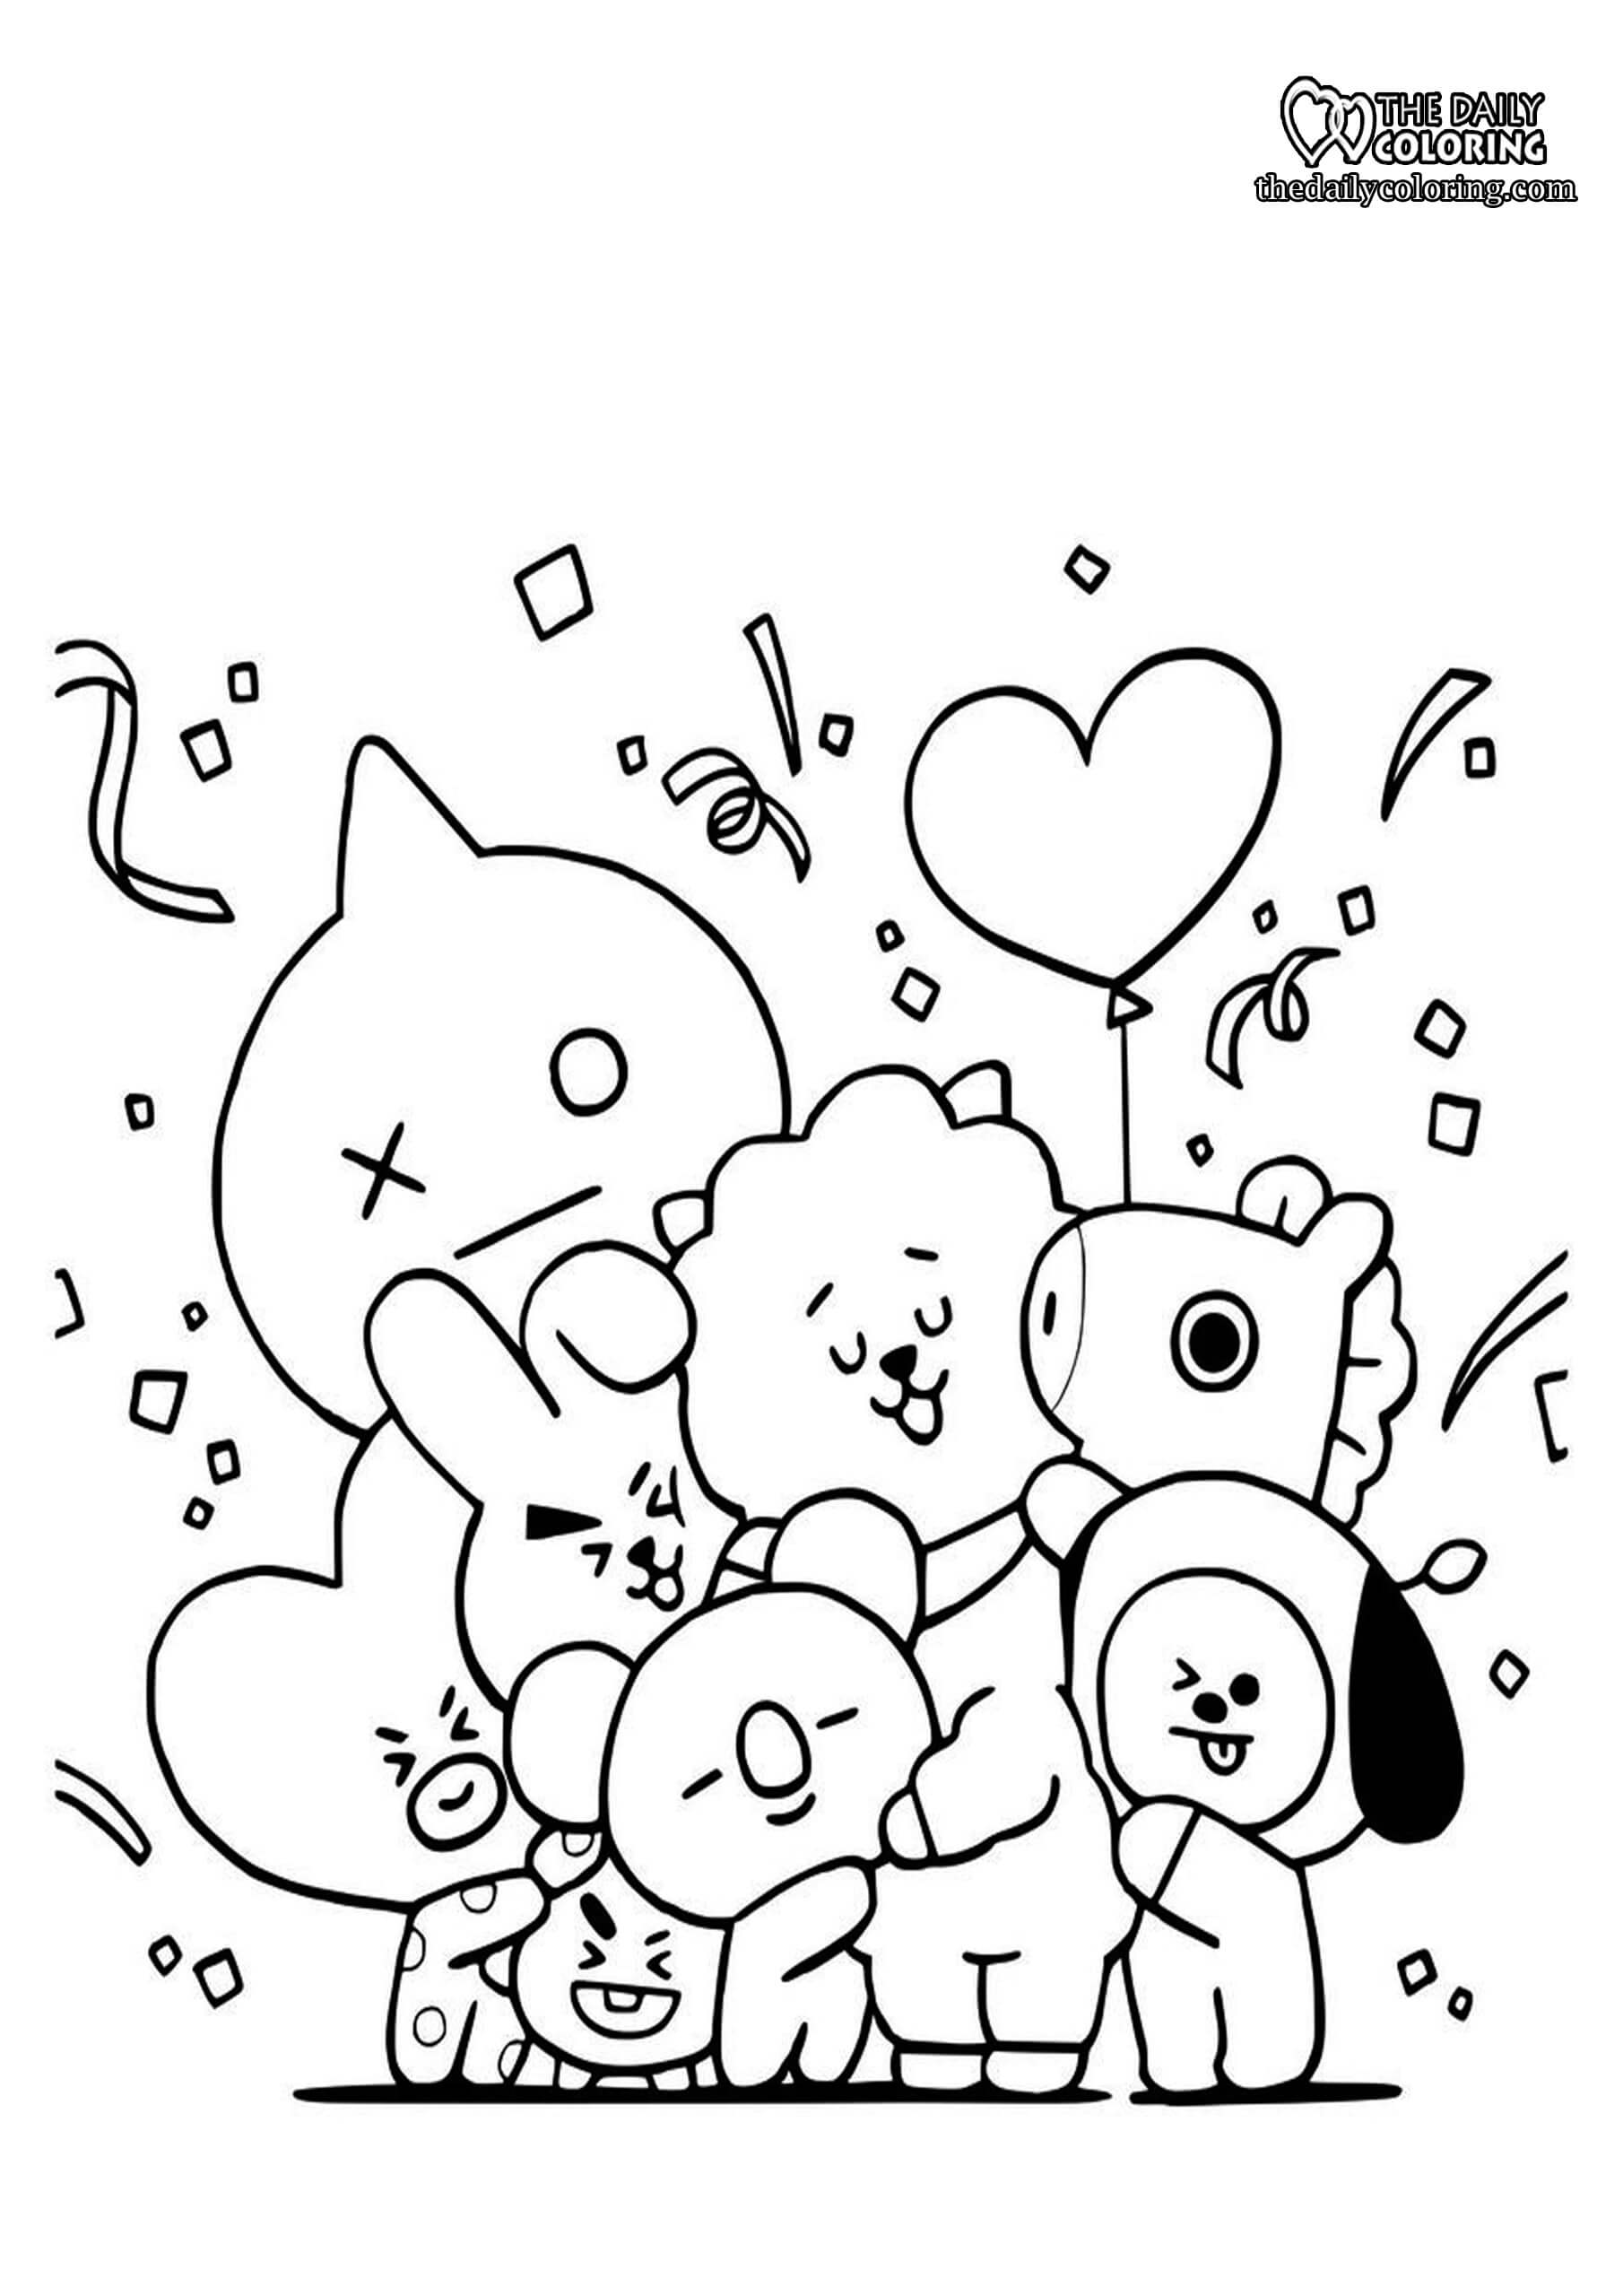 bt21 coloring page